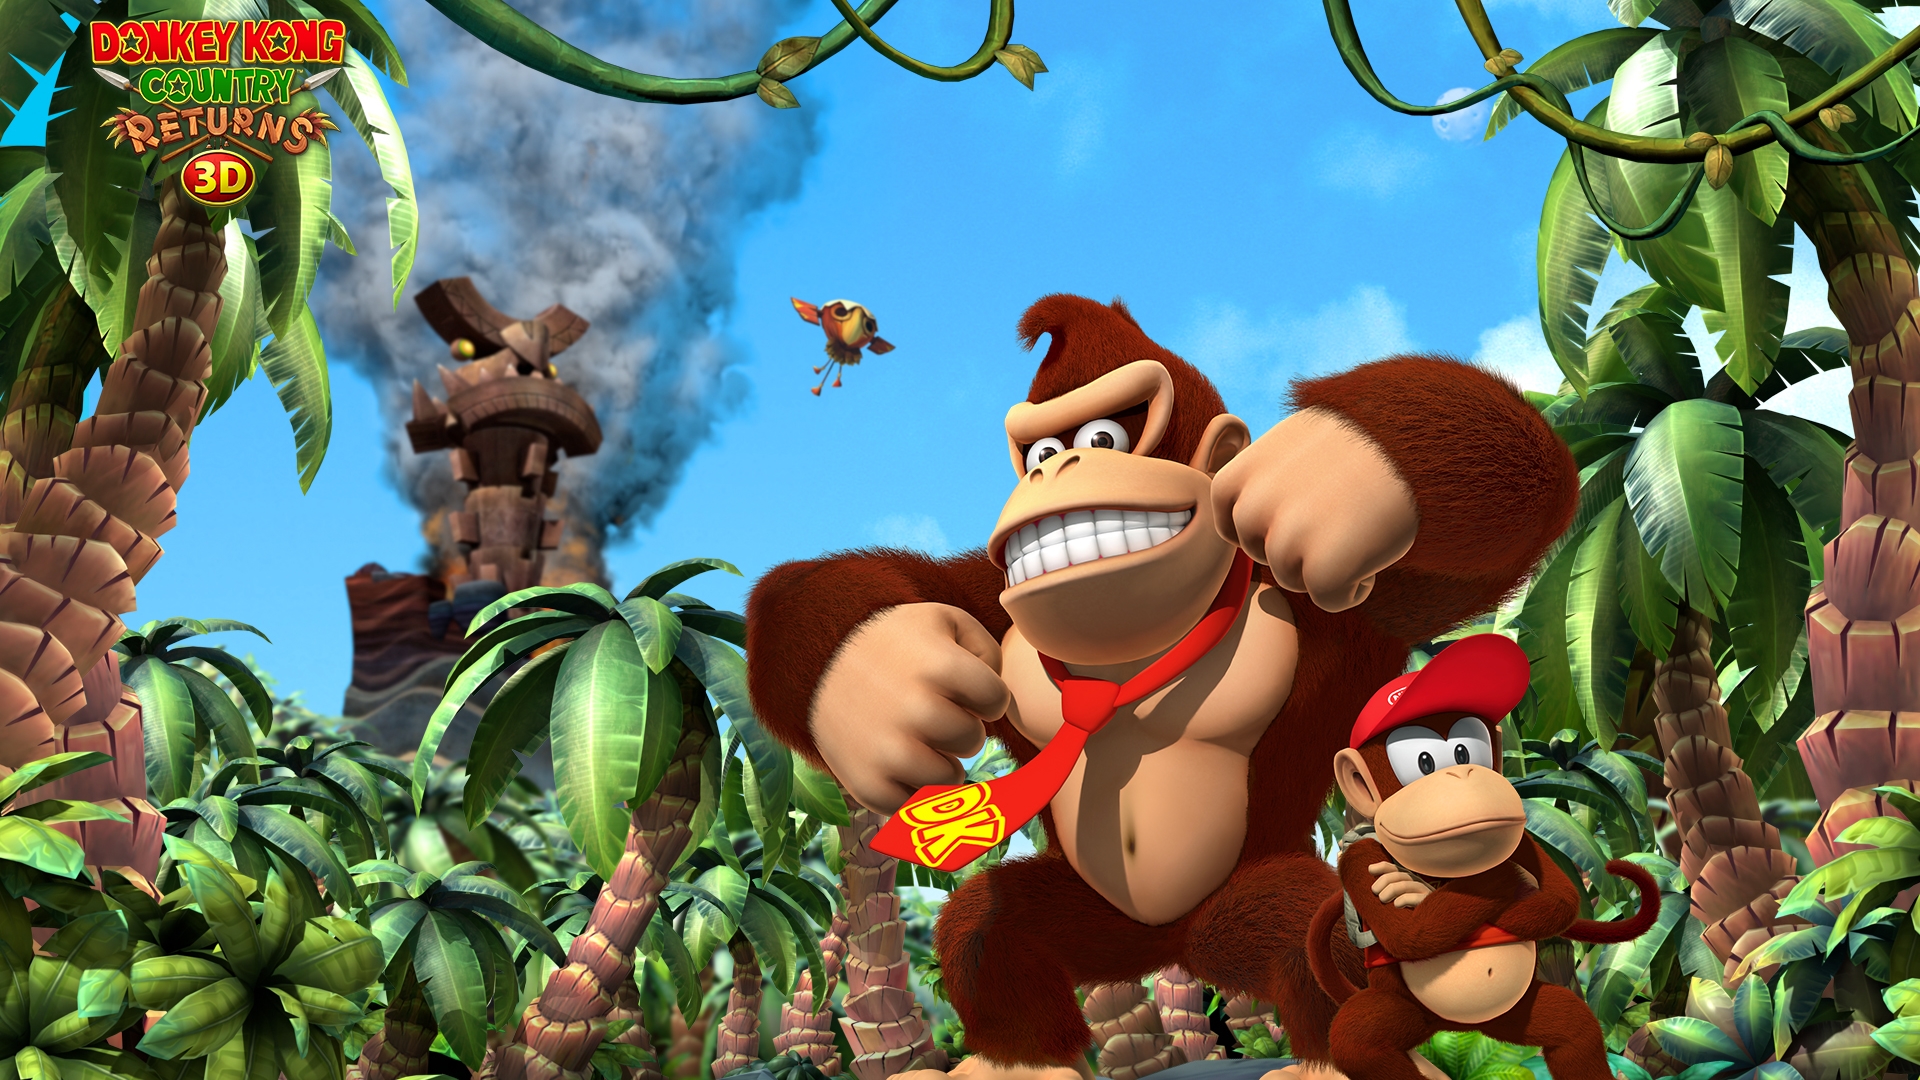 Video Game Donkey Kong Country Returns 3D HD Wallpaper | Background Image